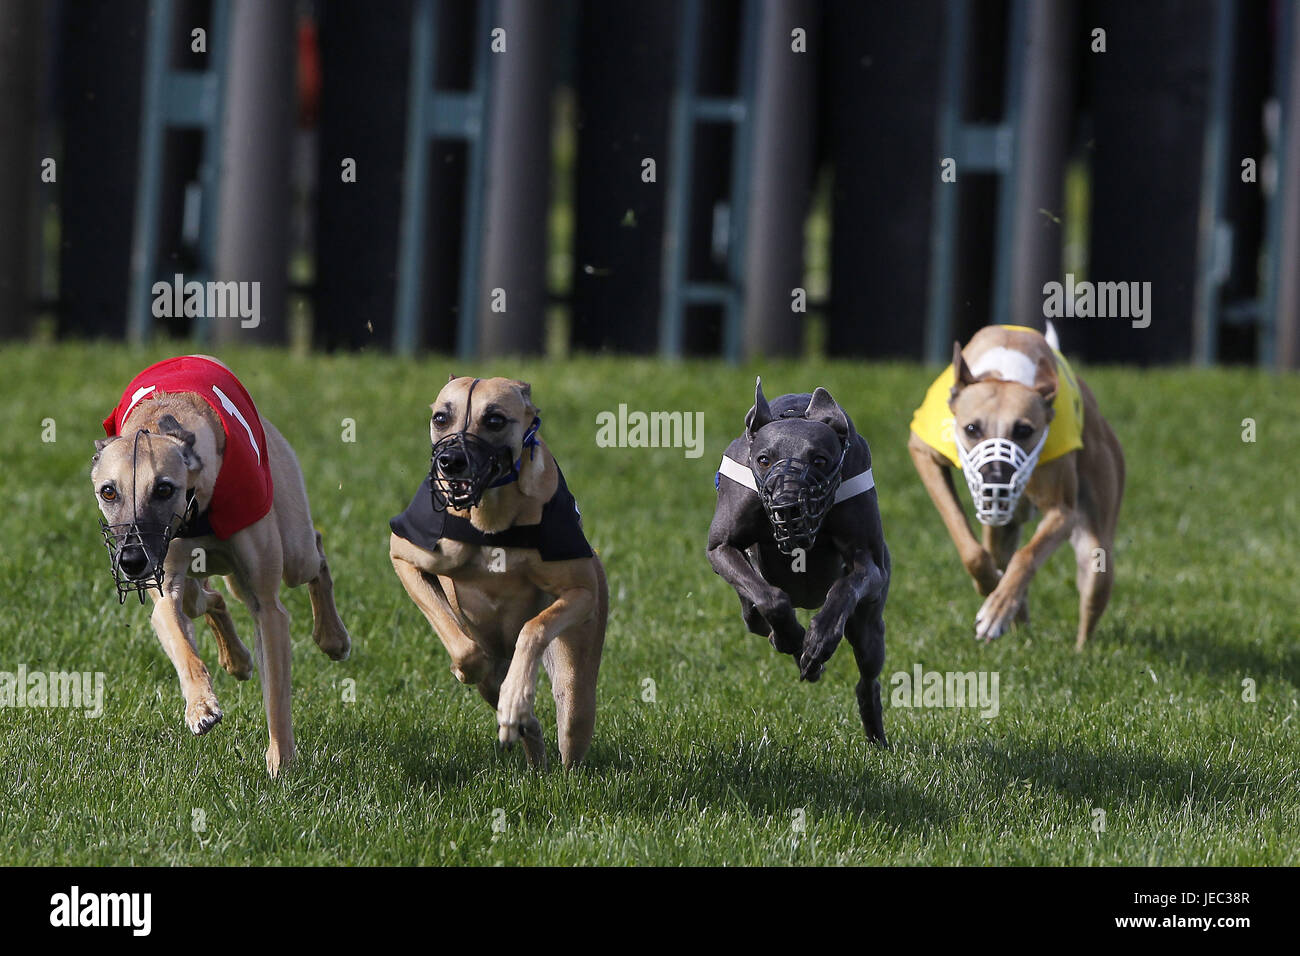 Whippet with dog race, Stock Photo